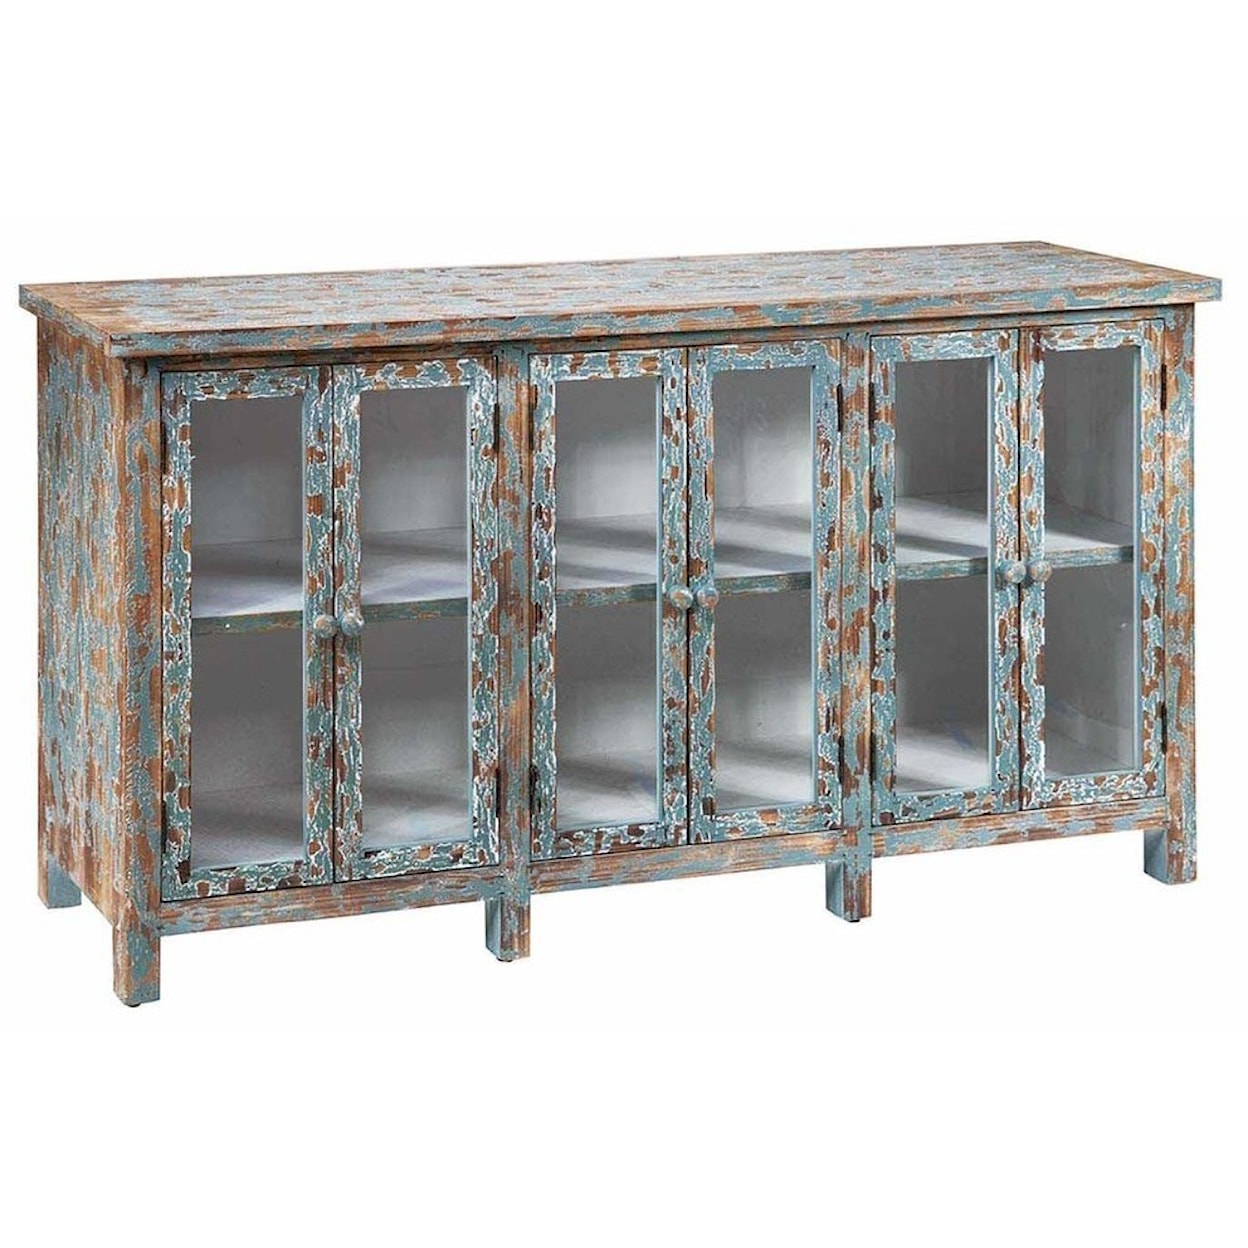 Crestview Collection Accent Furniture Dawson Creek Weathered Oak And Cyan 6 Door S